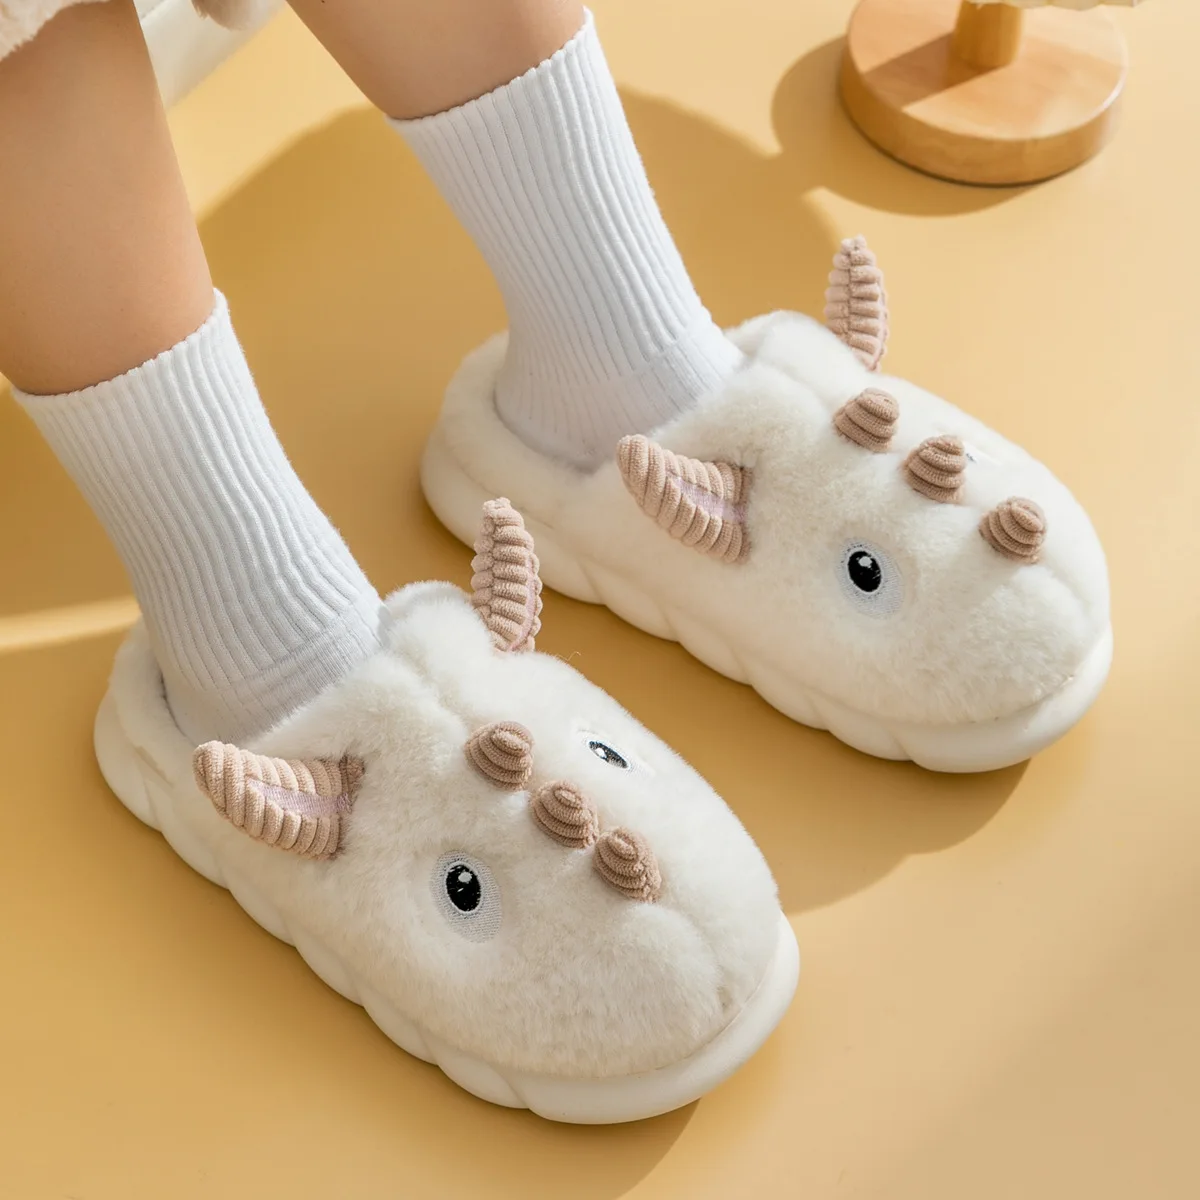 Hot Sale Product Lovely Animal Warm Soft Slippers Scuff Sheepskin Anti Slip Fur shoes Stuffed Slippers For Gift